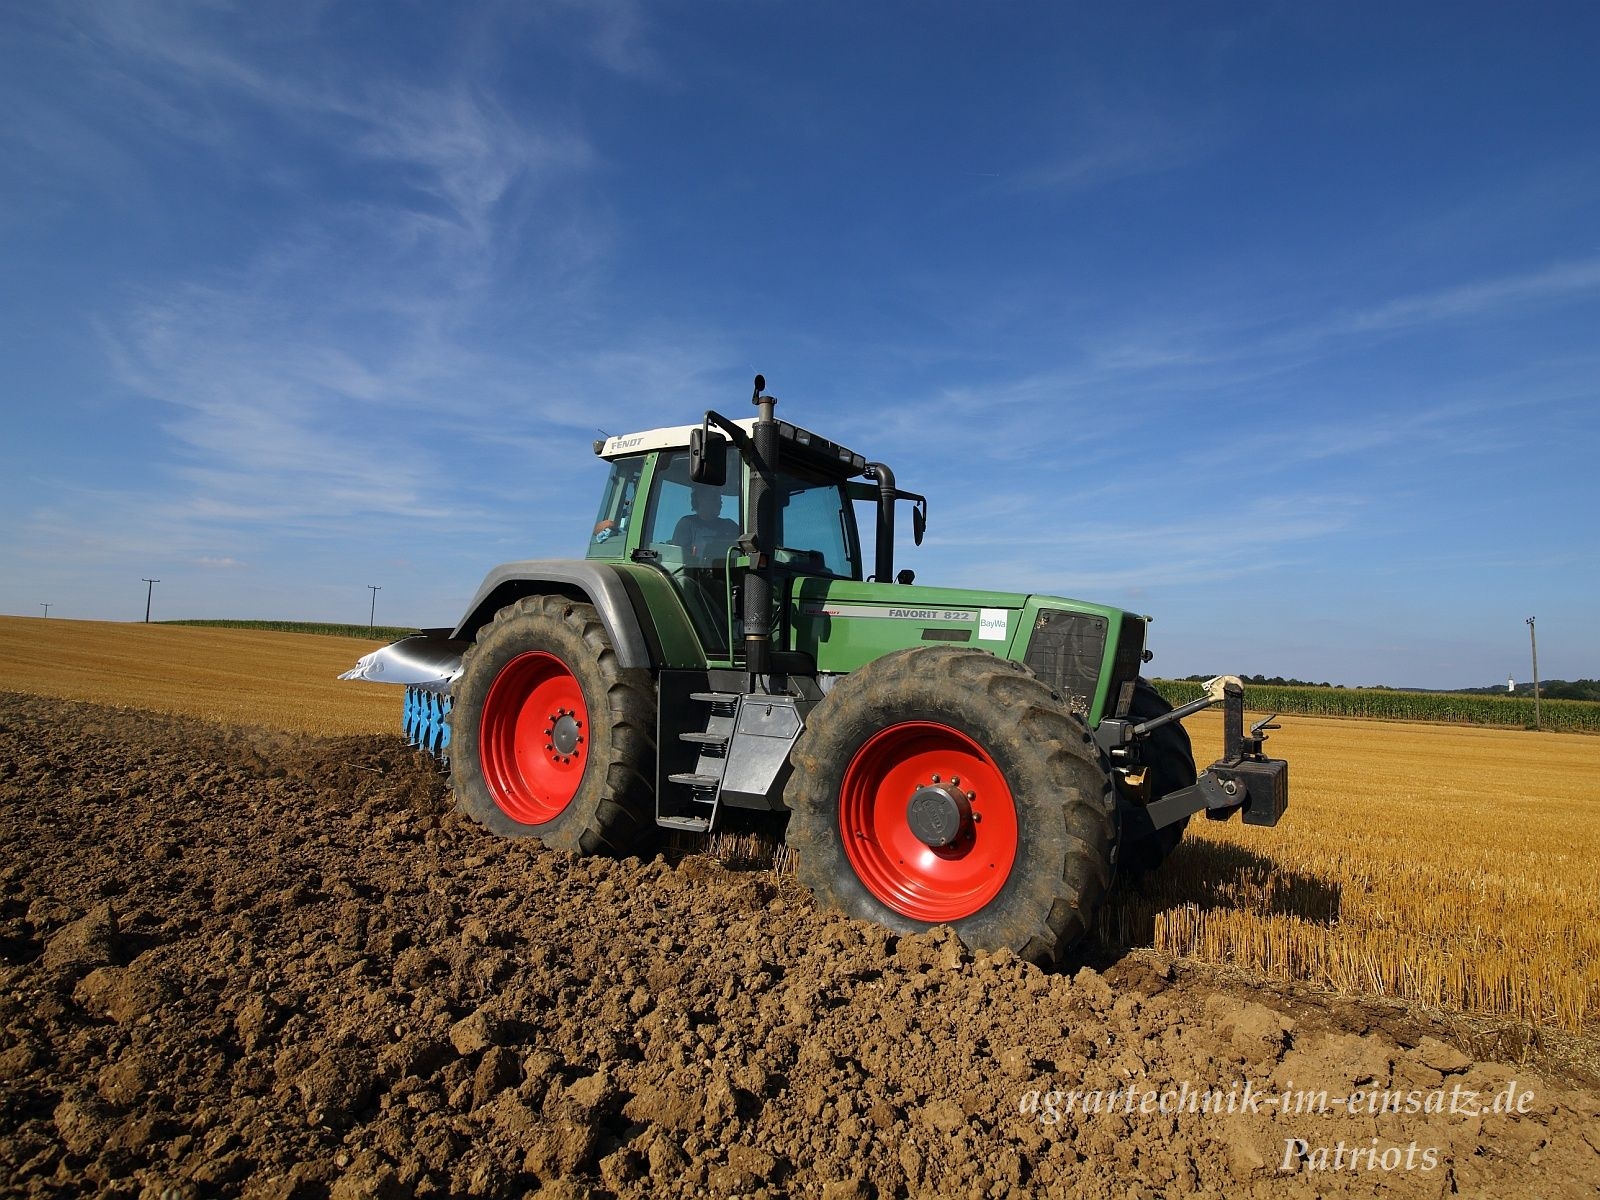 fendt wallpaper,land vehicle,tractor,agricultural machinery,vehicle,field